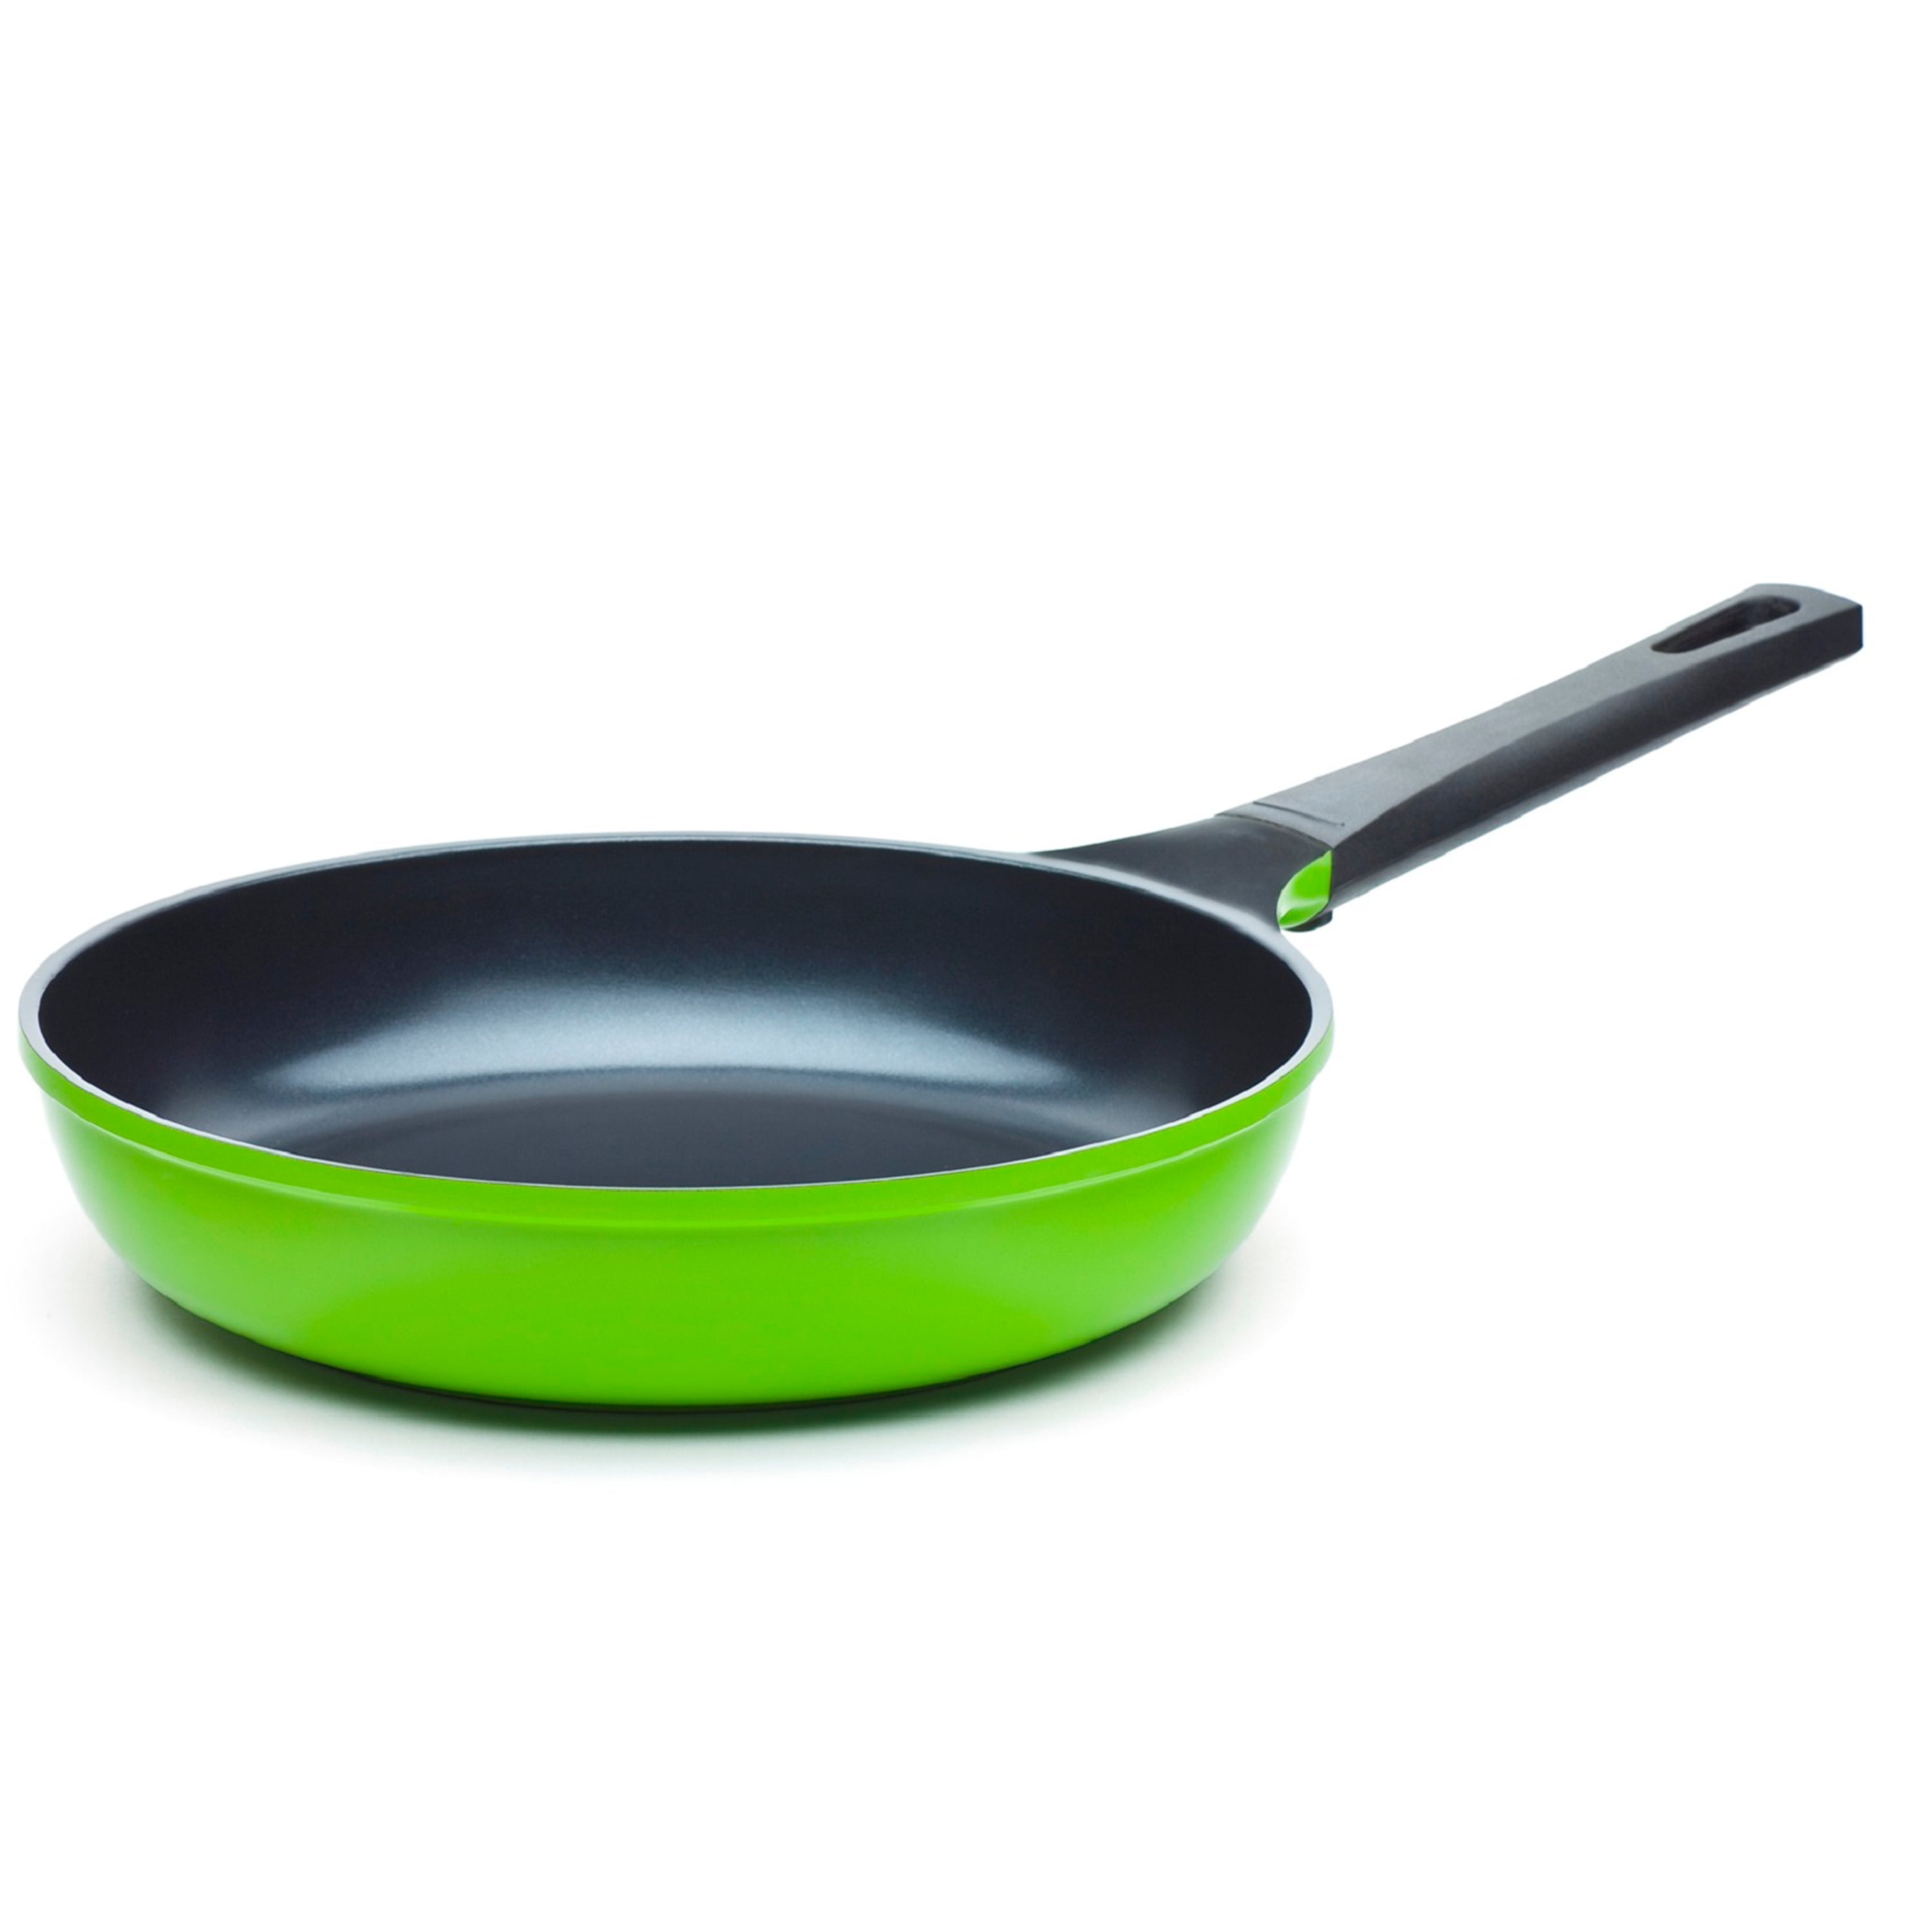 8 Stone Earth Fry Pan by Ozeri, with a 100% APEO & PFOA-Free Nonstick  Coating from Germany, 1 - Harris Teeter